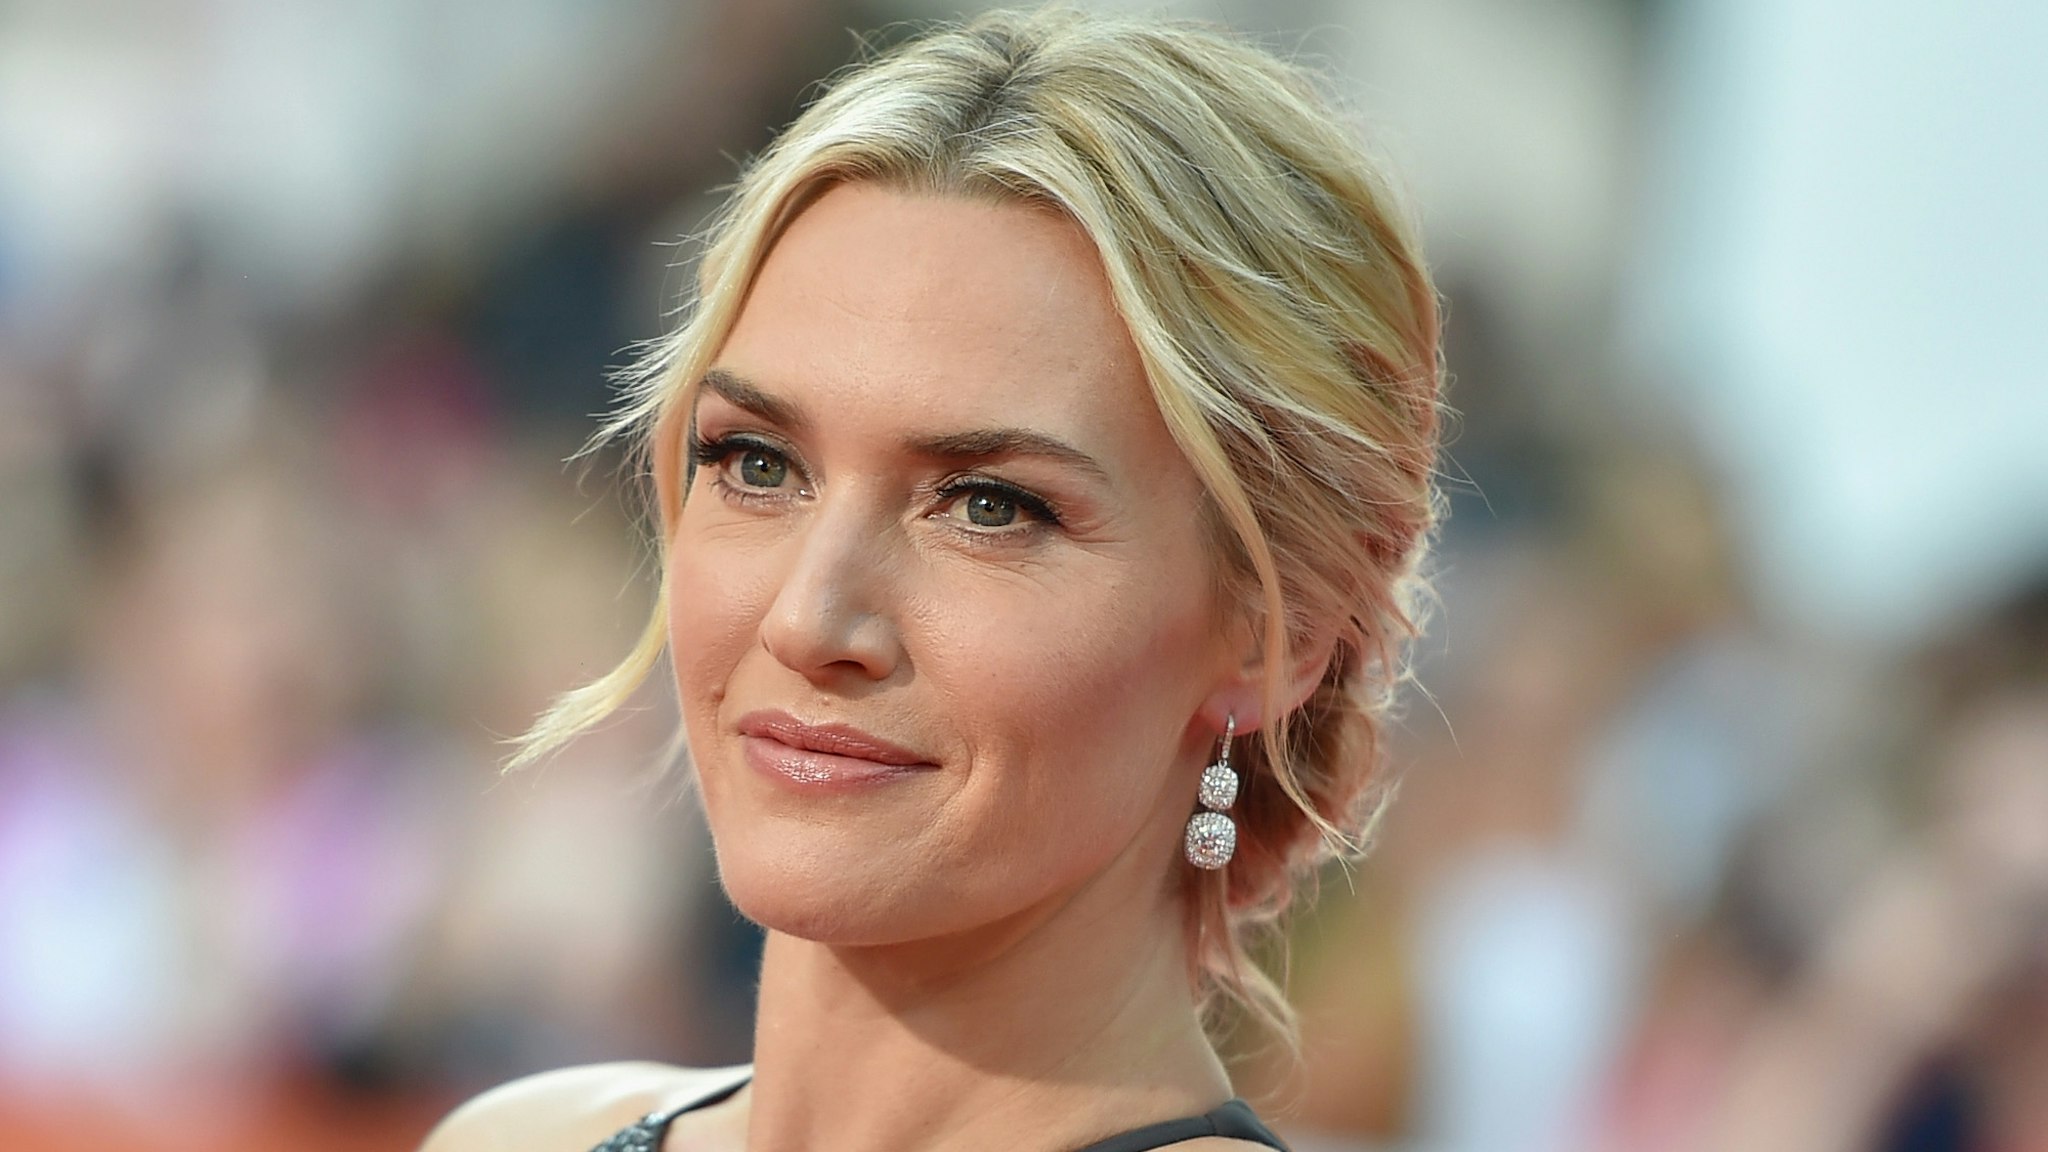 Actress Kate Winslet attends "The Dressmaker" premiere during the 2015 Toronto International Film Festival at Roy Thomson Hall on September 14, 2015 in Toronto, Canada.